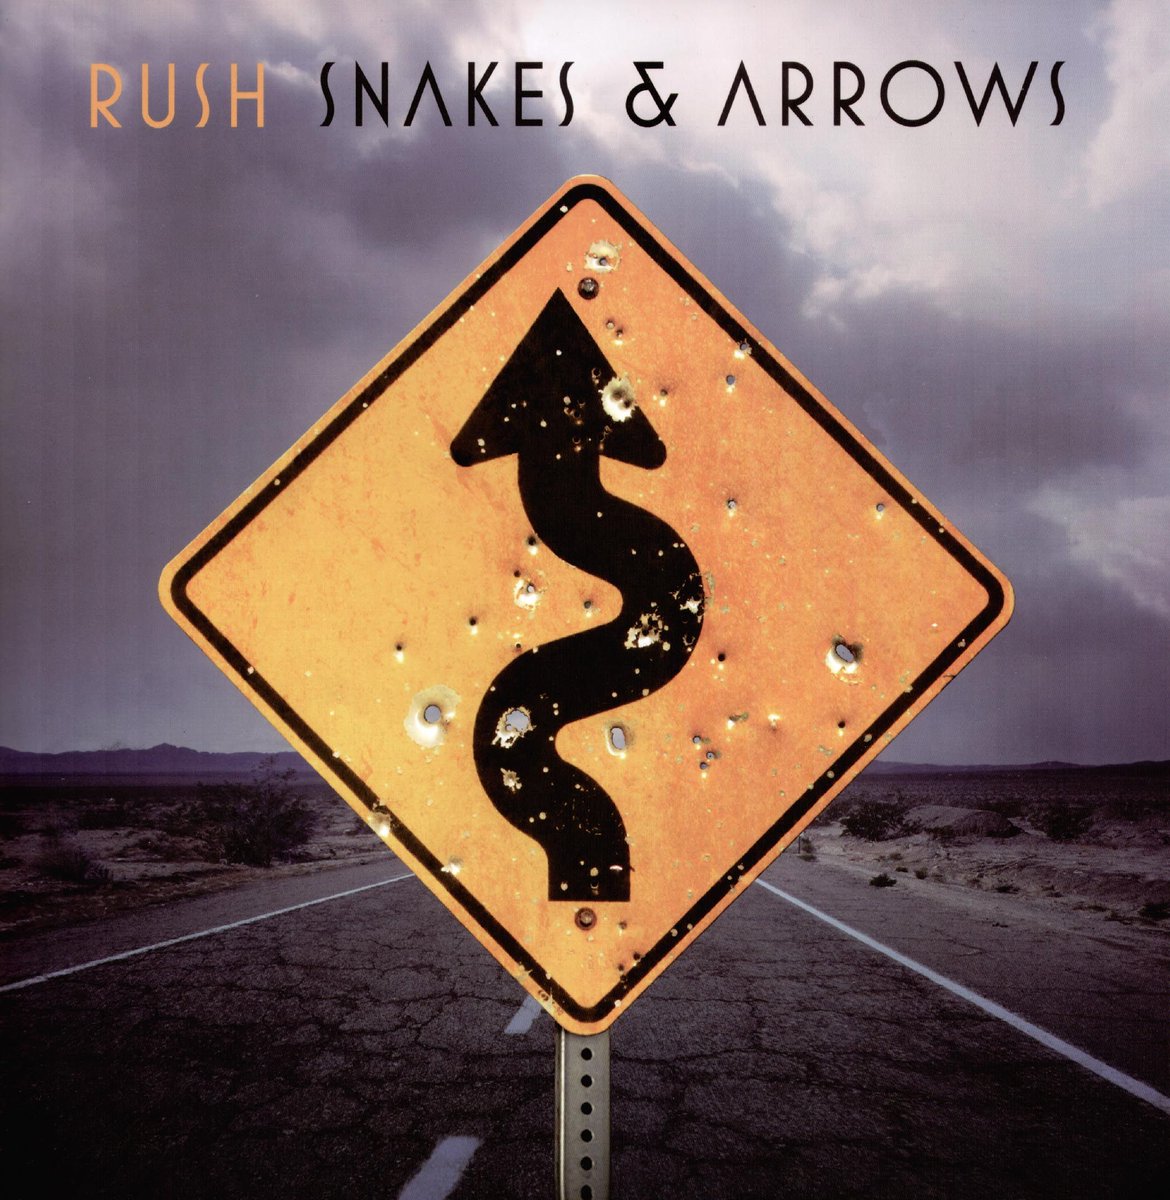 May 1, 2007 – Rush Snakes & Arrows is released.